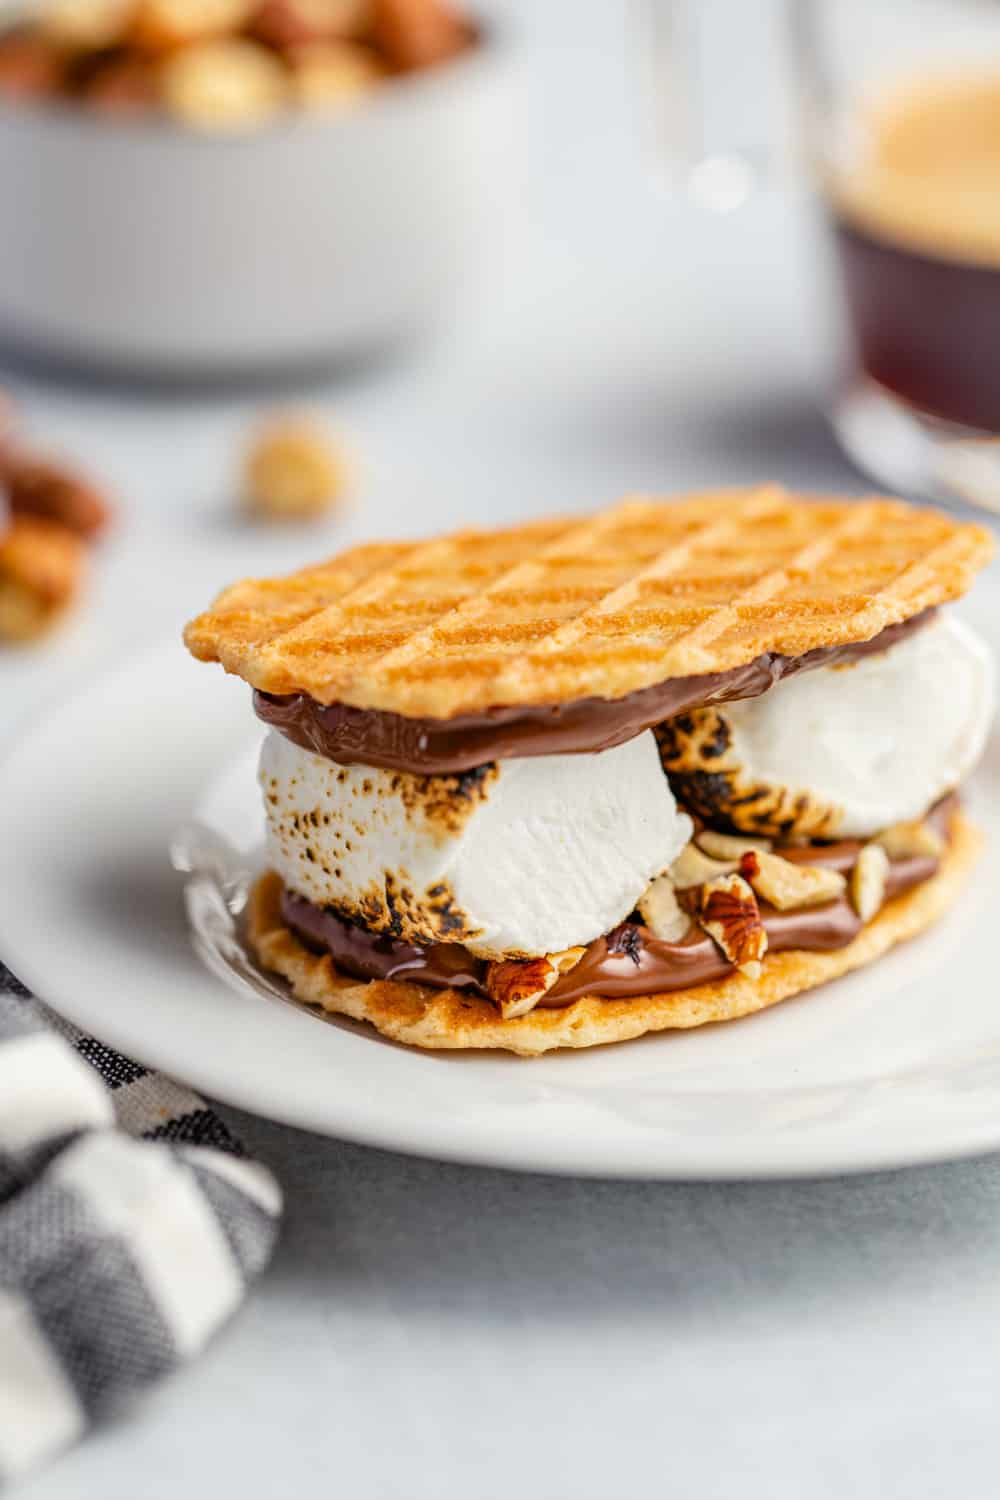 Plated s'more made with waffle cookies, chocolate hazelnut spread and 2 large roasted marshmallows